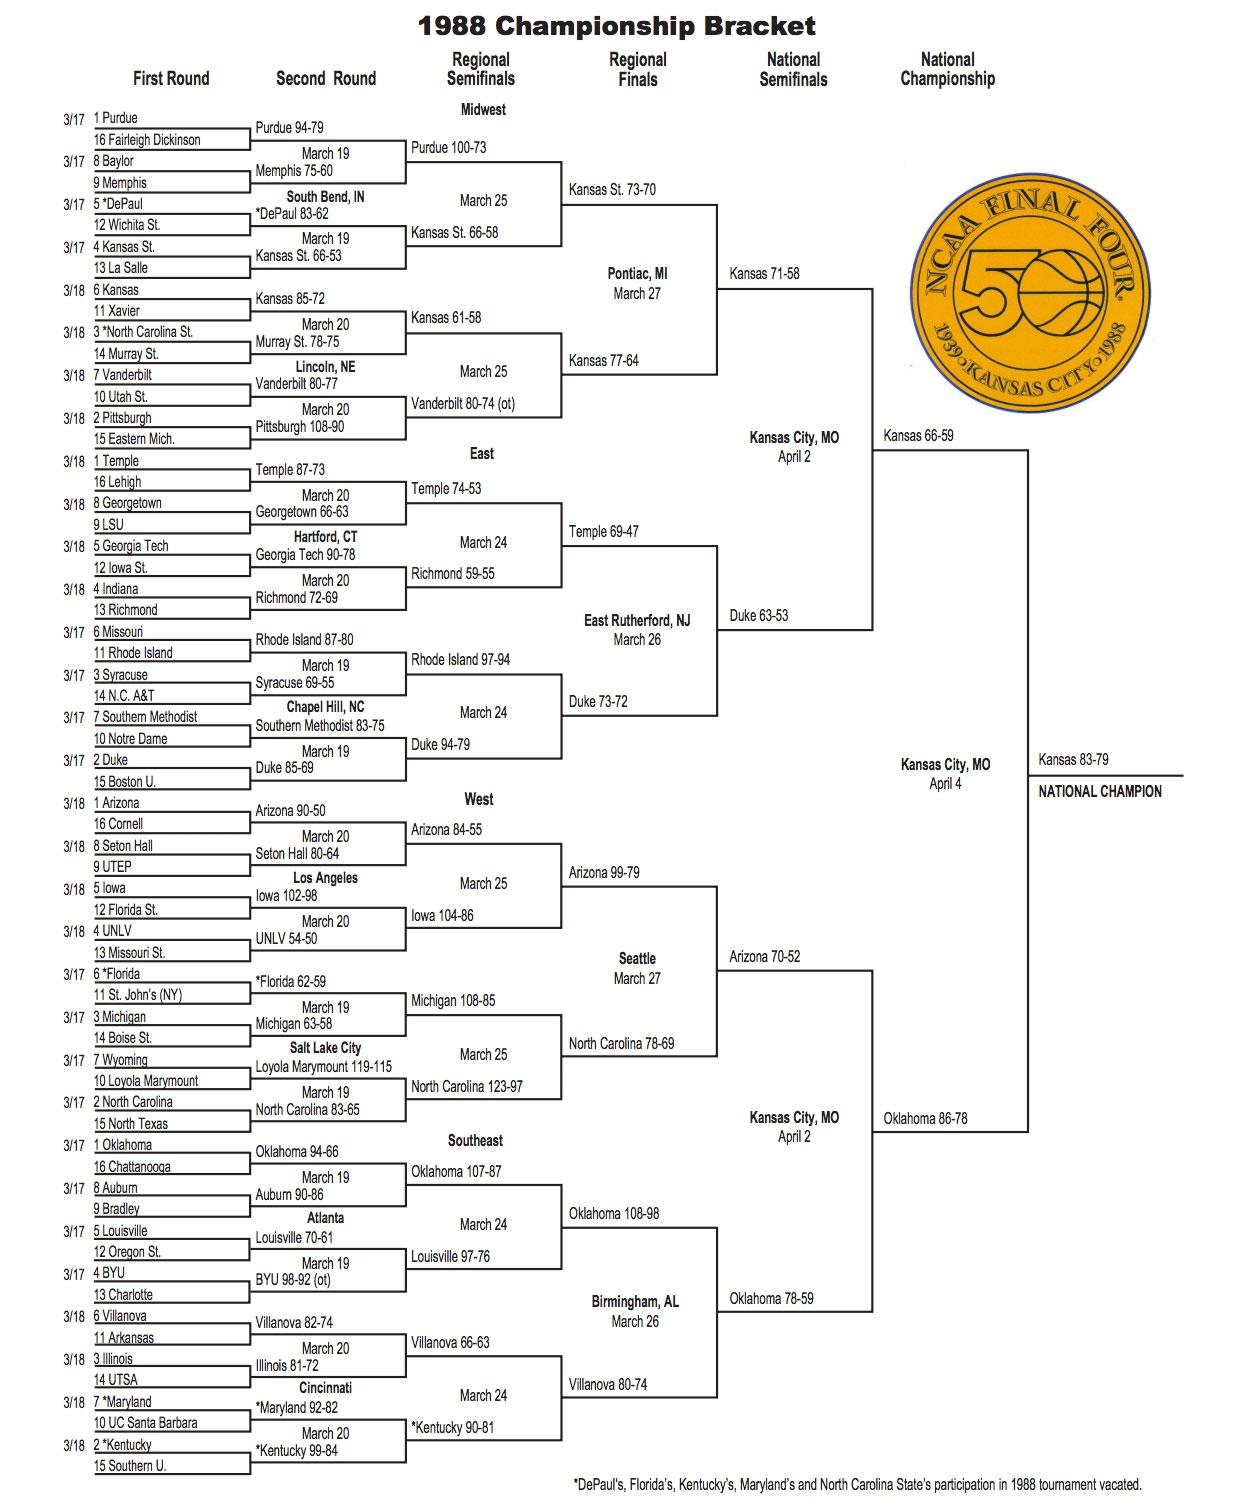 This is the 1988 NCAA tournament bracket